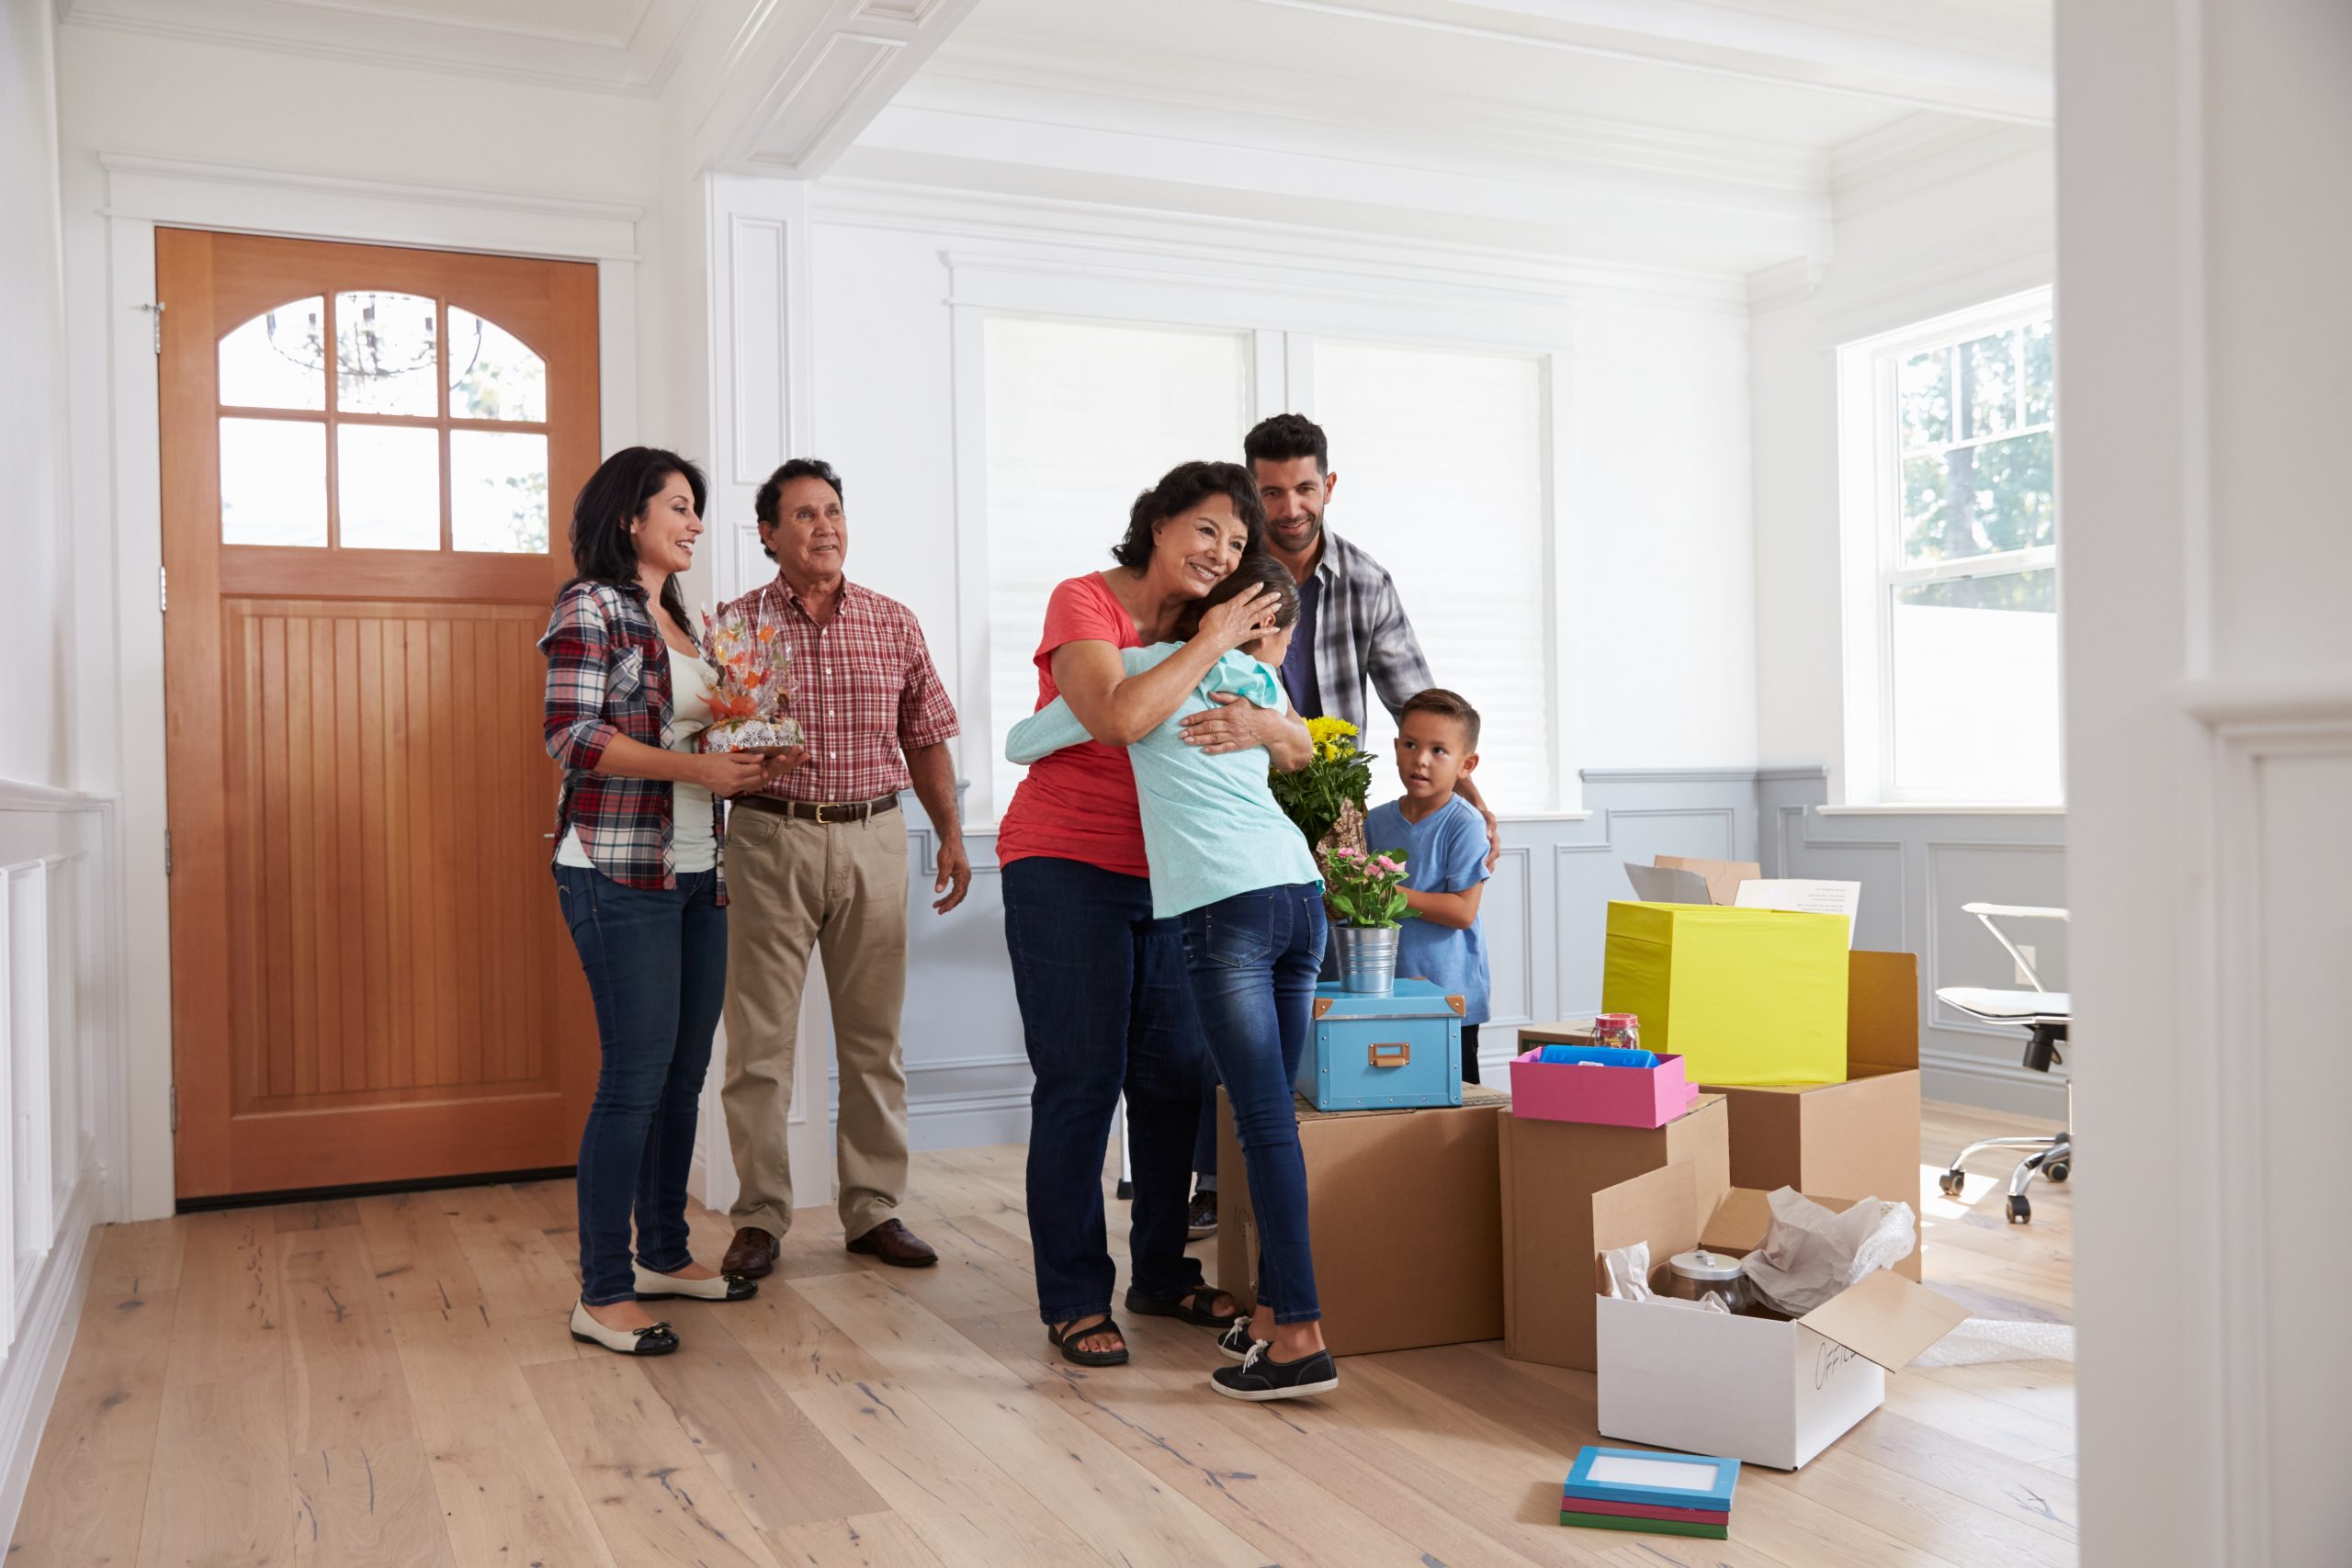 Best Housewarming Gift Ideas: Top Picks for New Homeowners